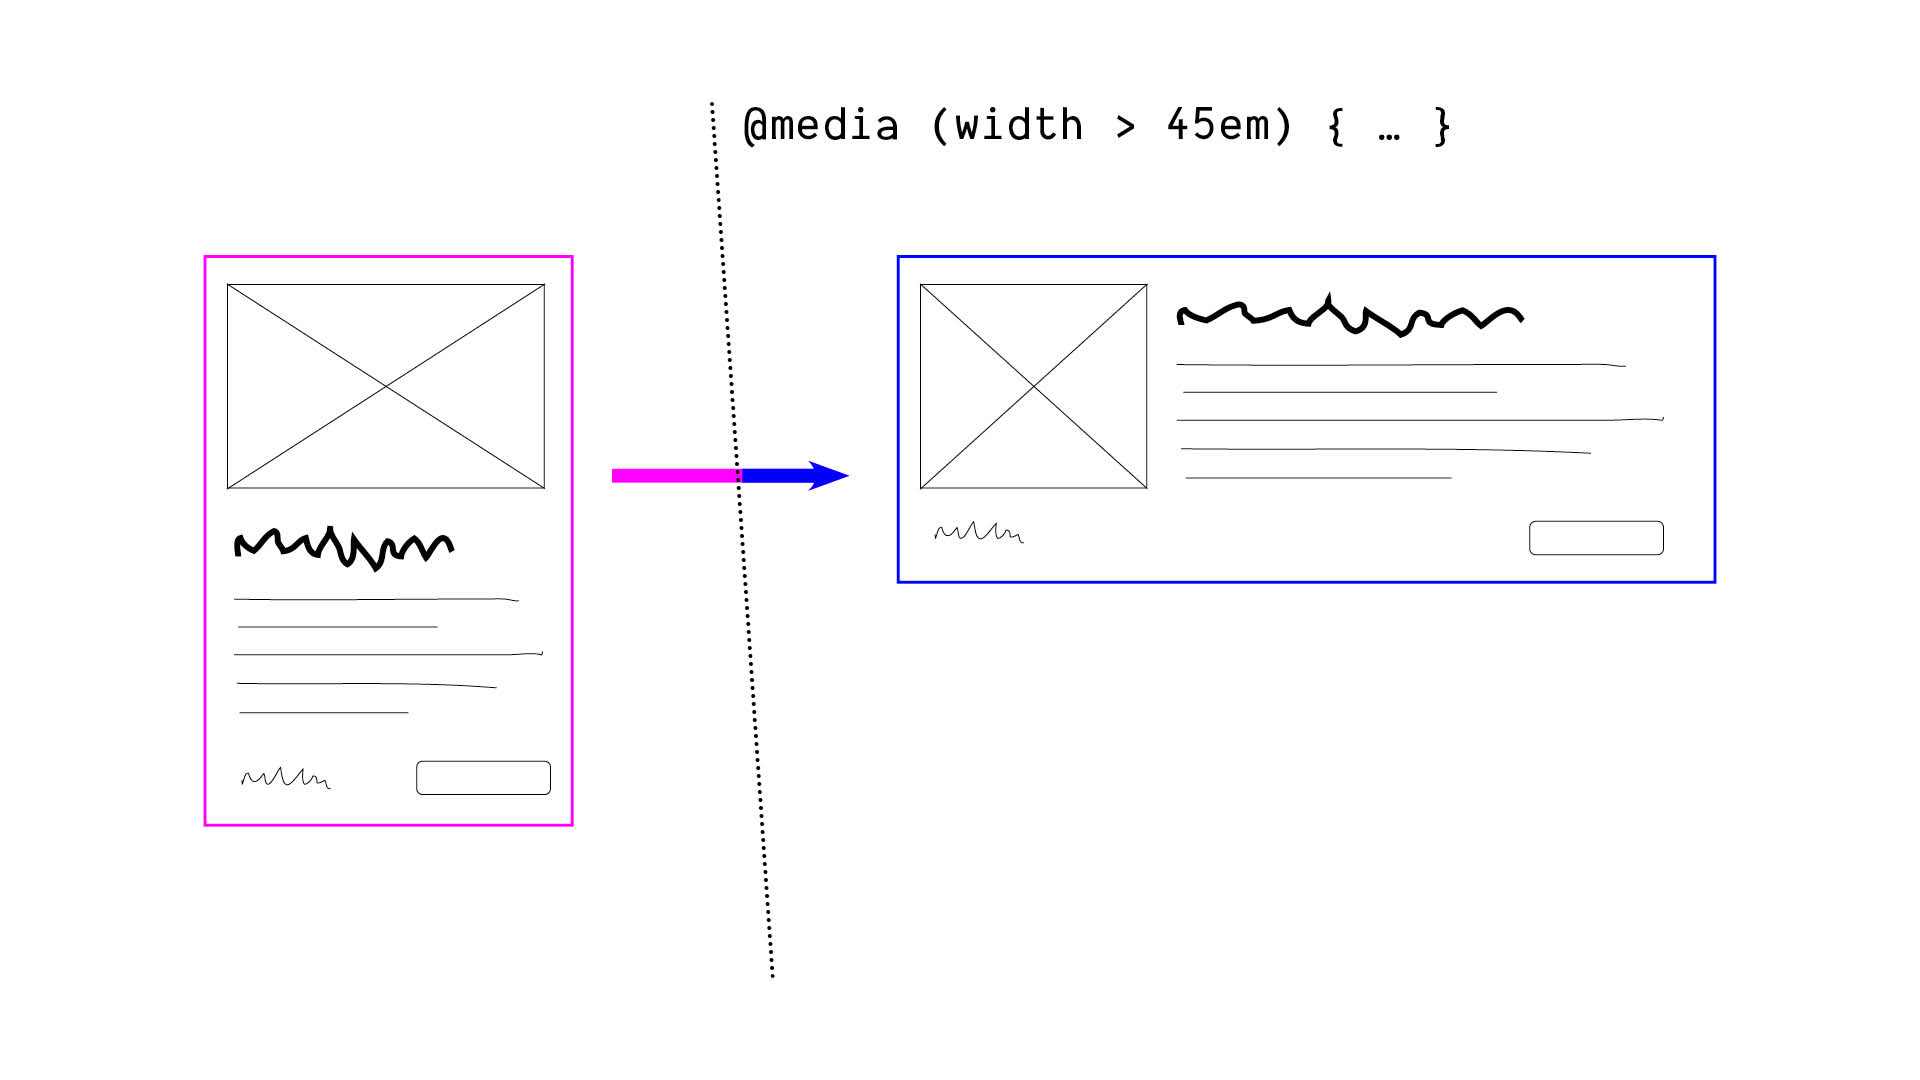 @media (width > 45em) -
diagram of two different card layouts
on either side of a media-query breakpoint
